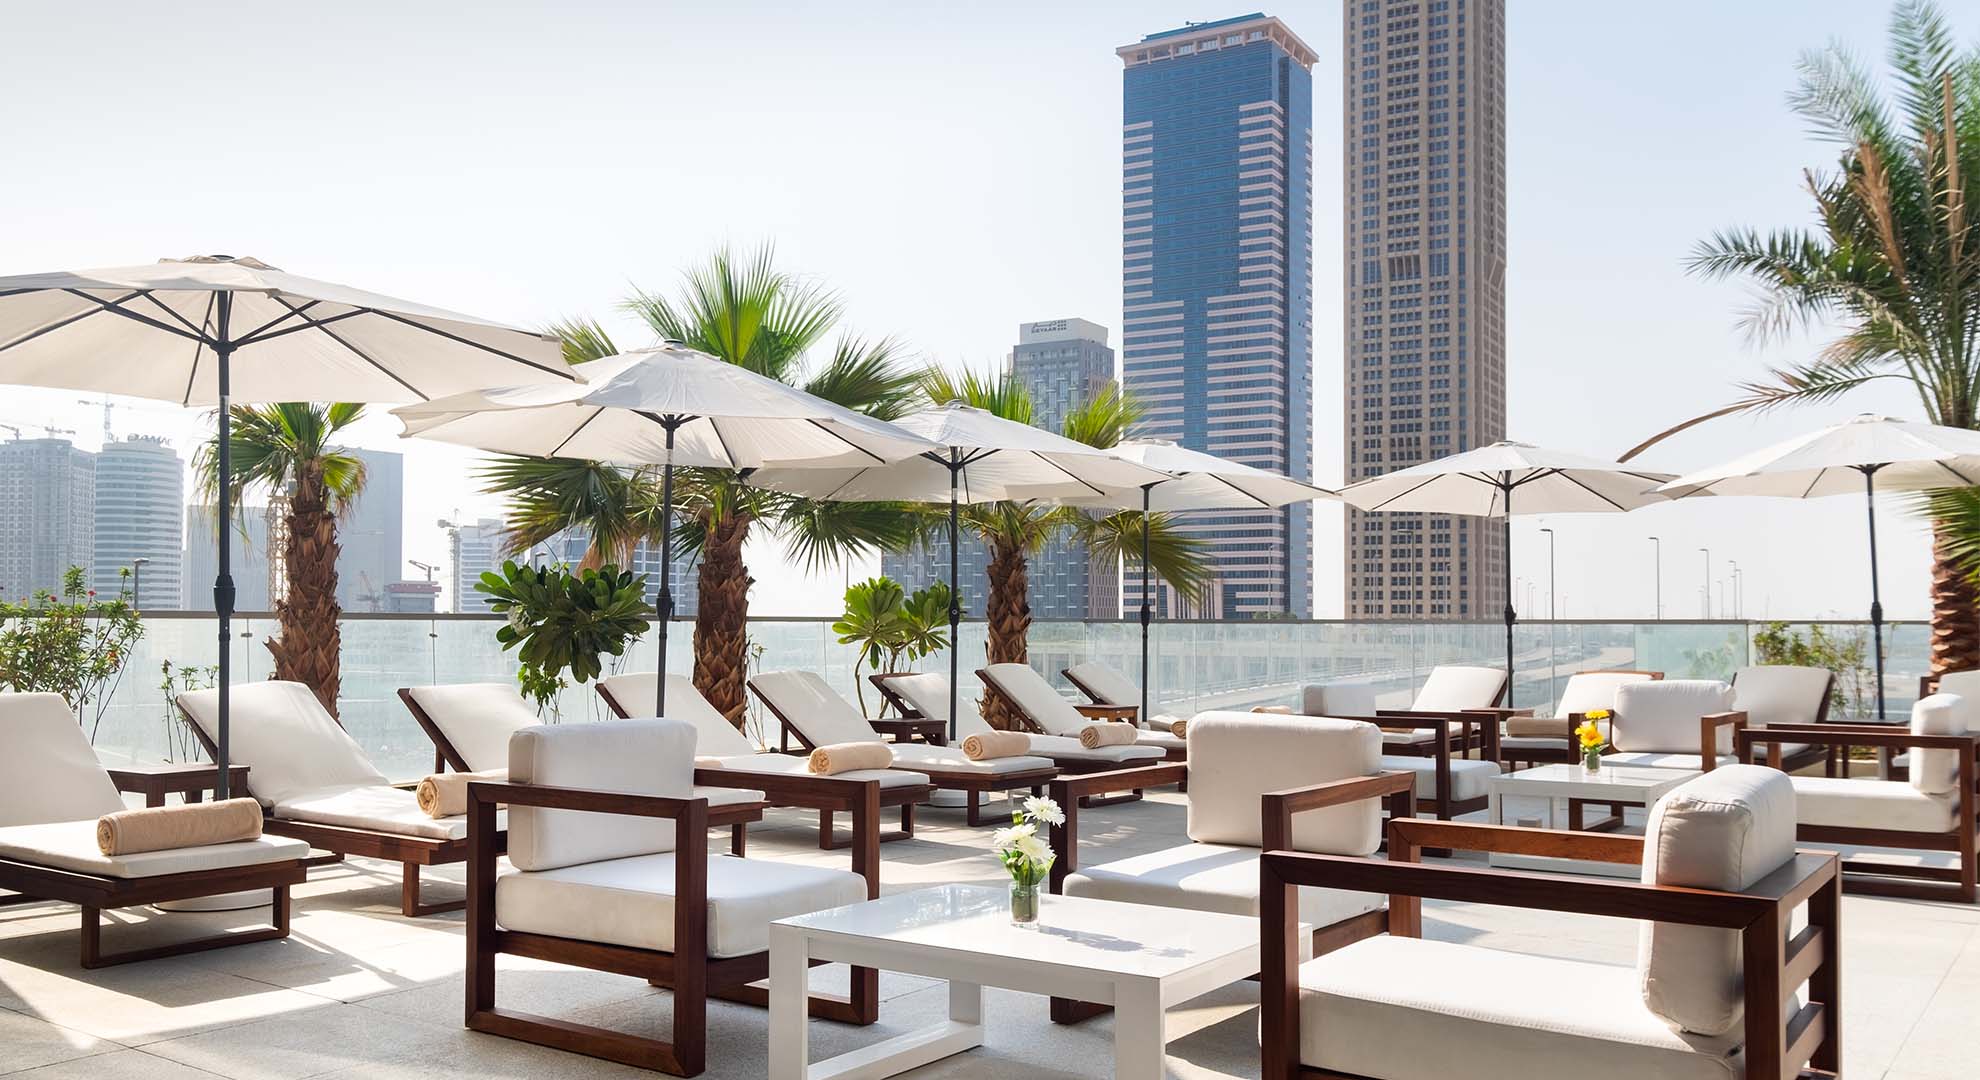 A Patio With Lounge Chairs And Umbrellas With Tall Buildings In The Background